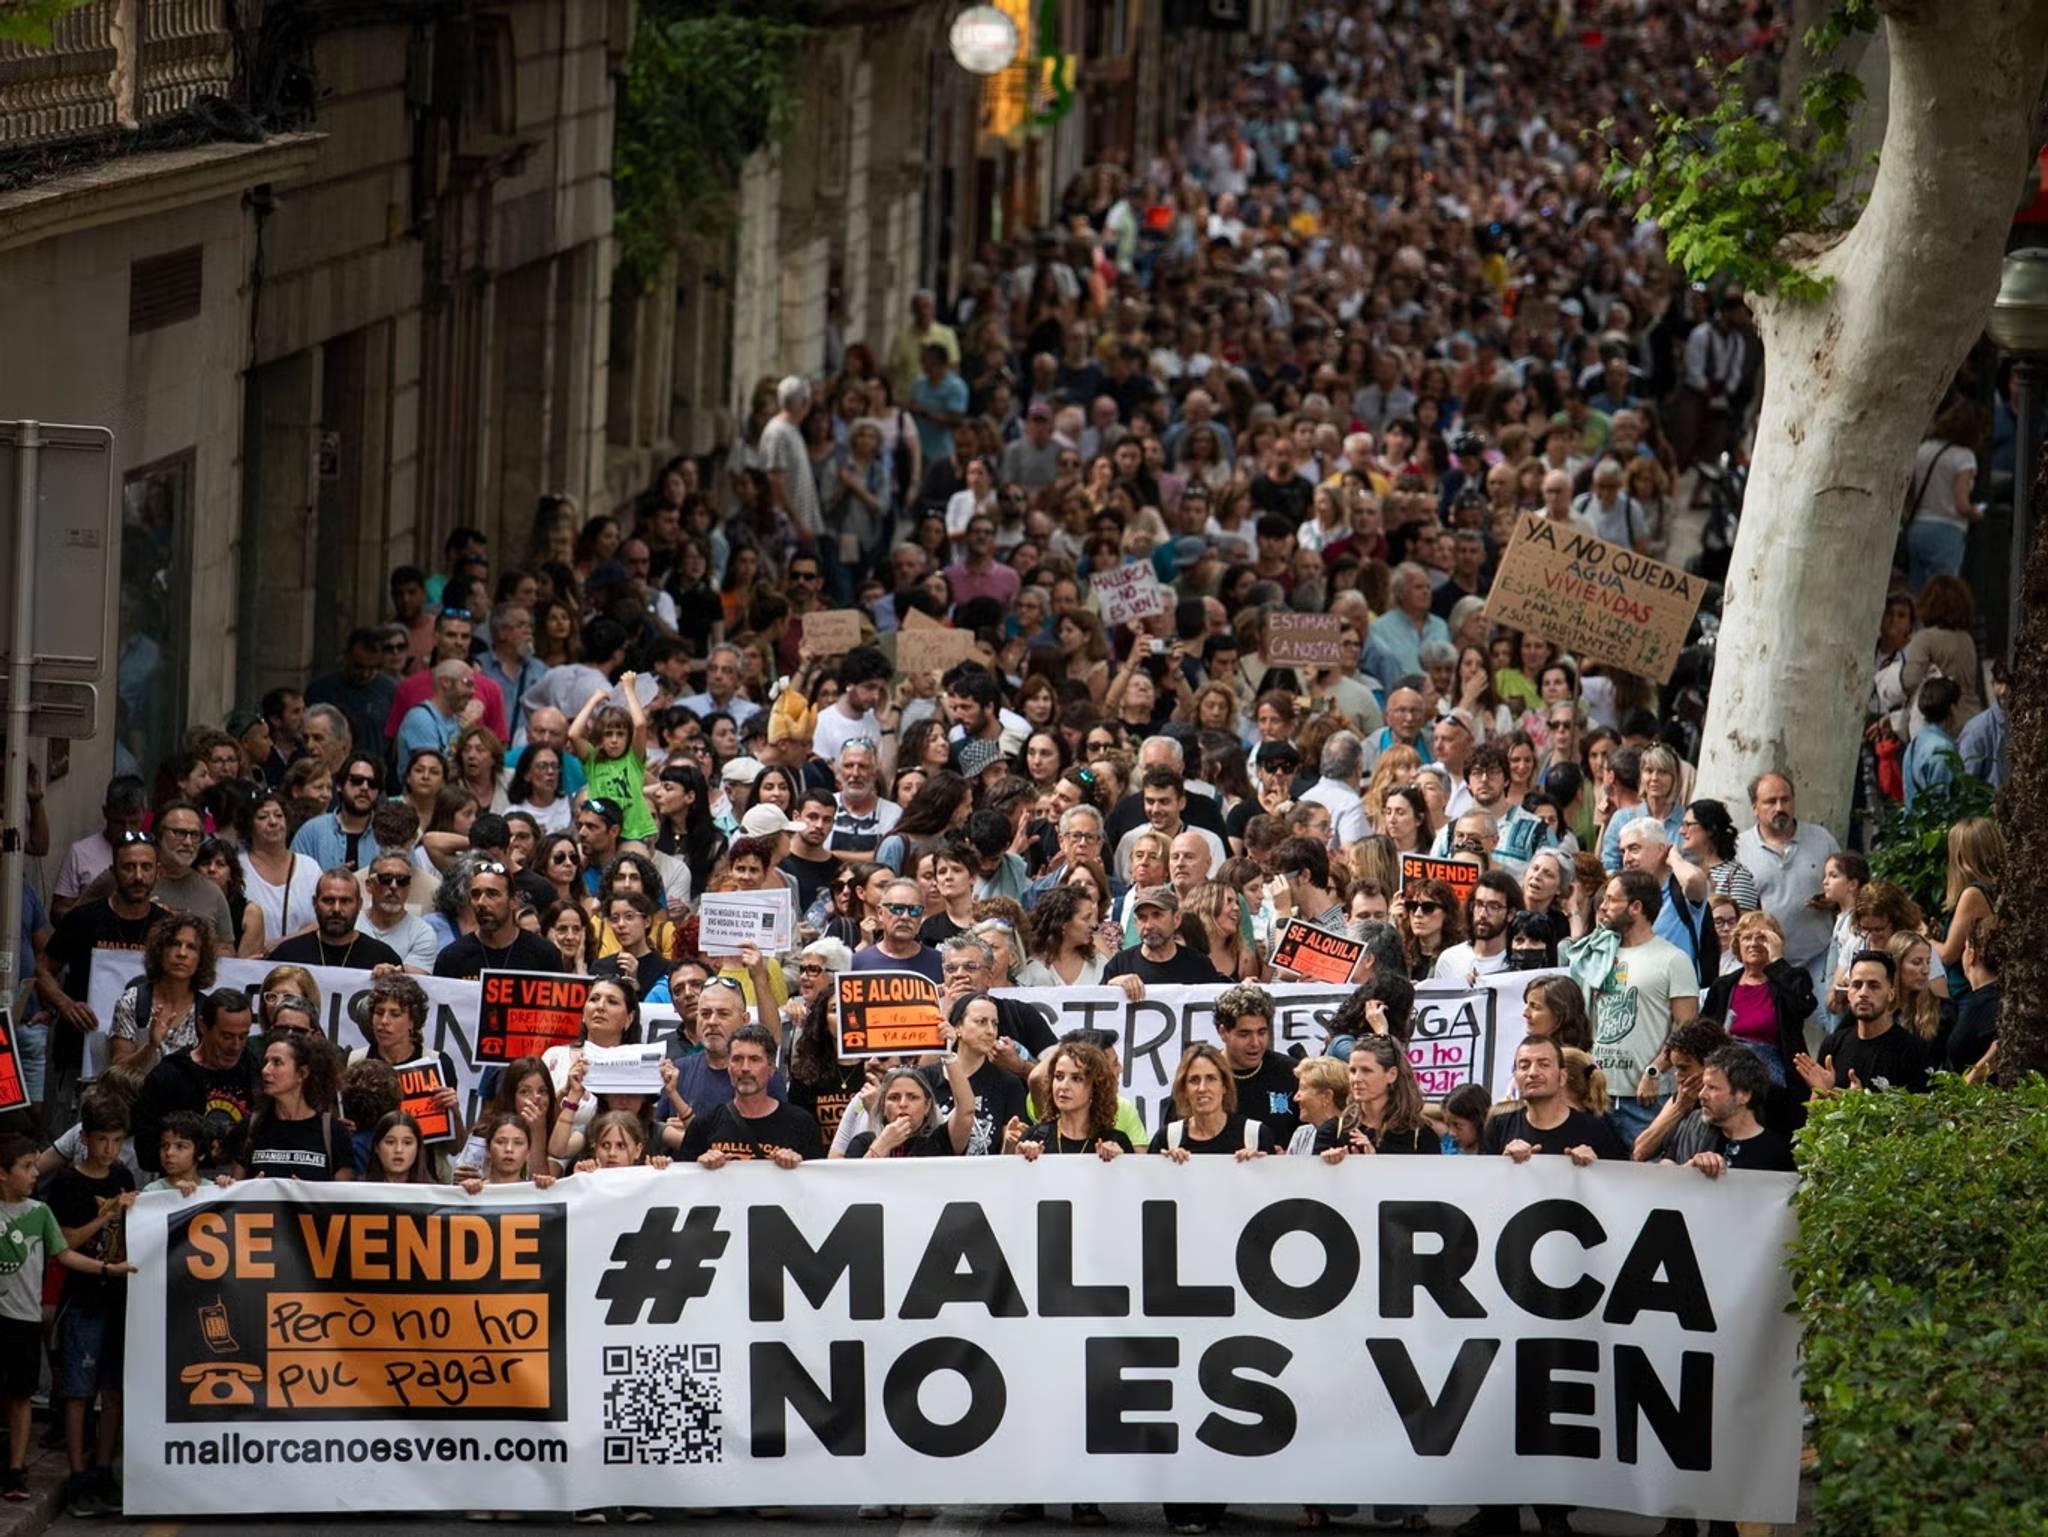 Protests in Majorca highlight deepening tourism divides